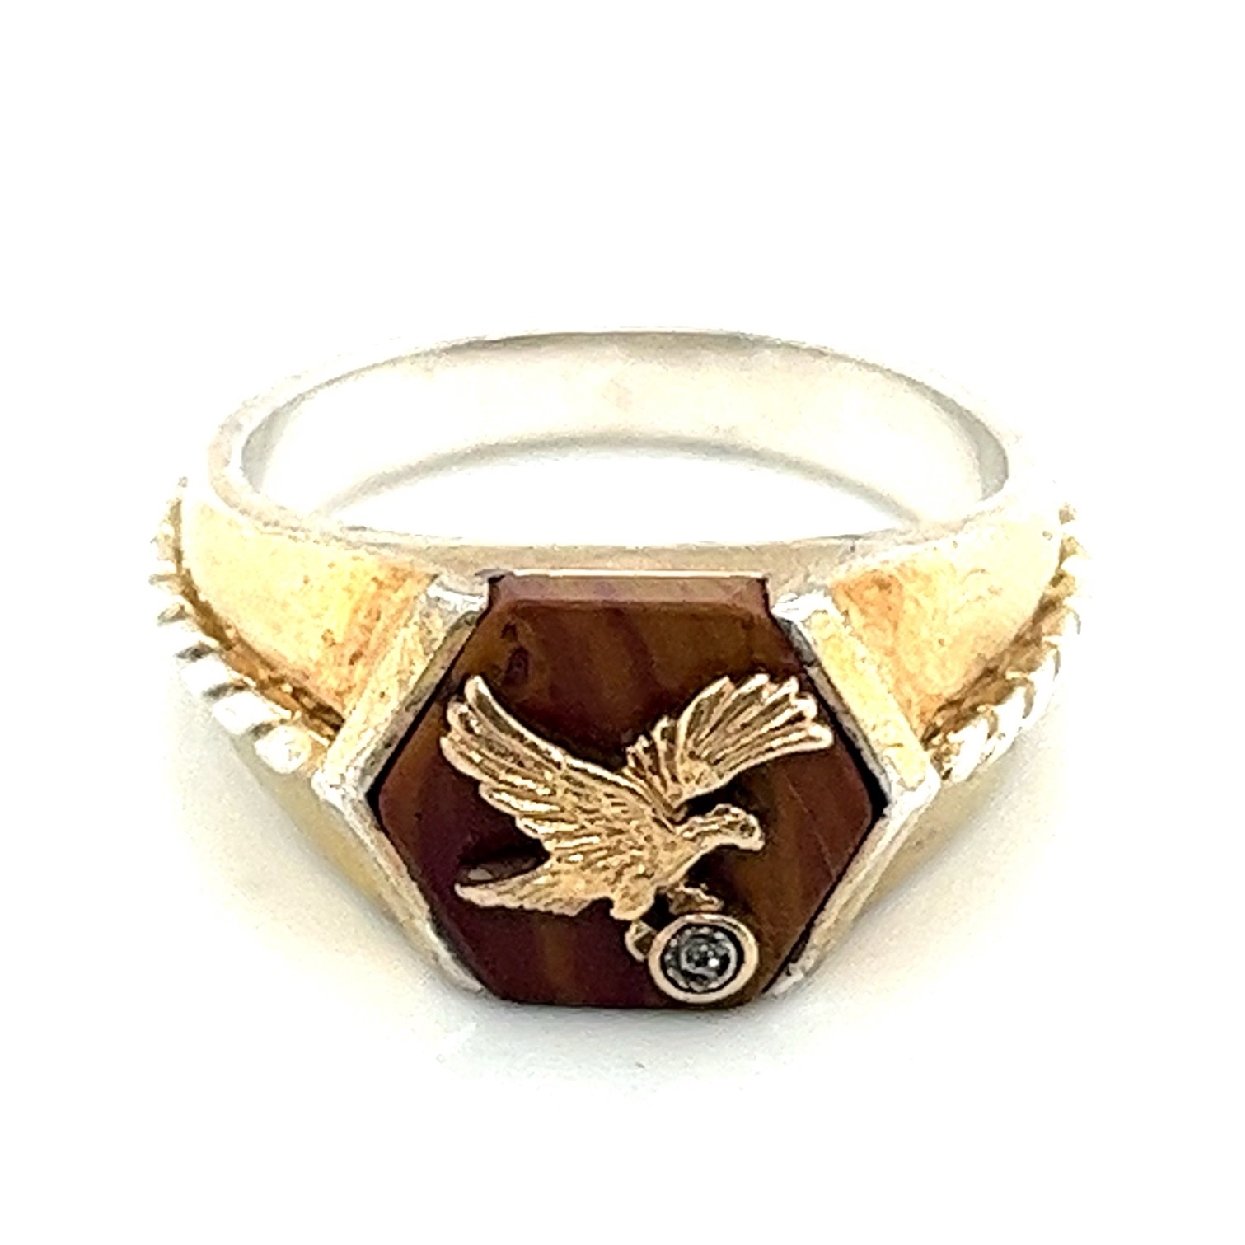 10K Yellow Gold and Sterling Silver Eagle on Agate Ring with Diamond Accent Size 14 